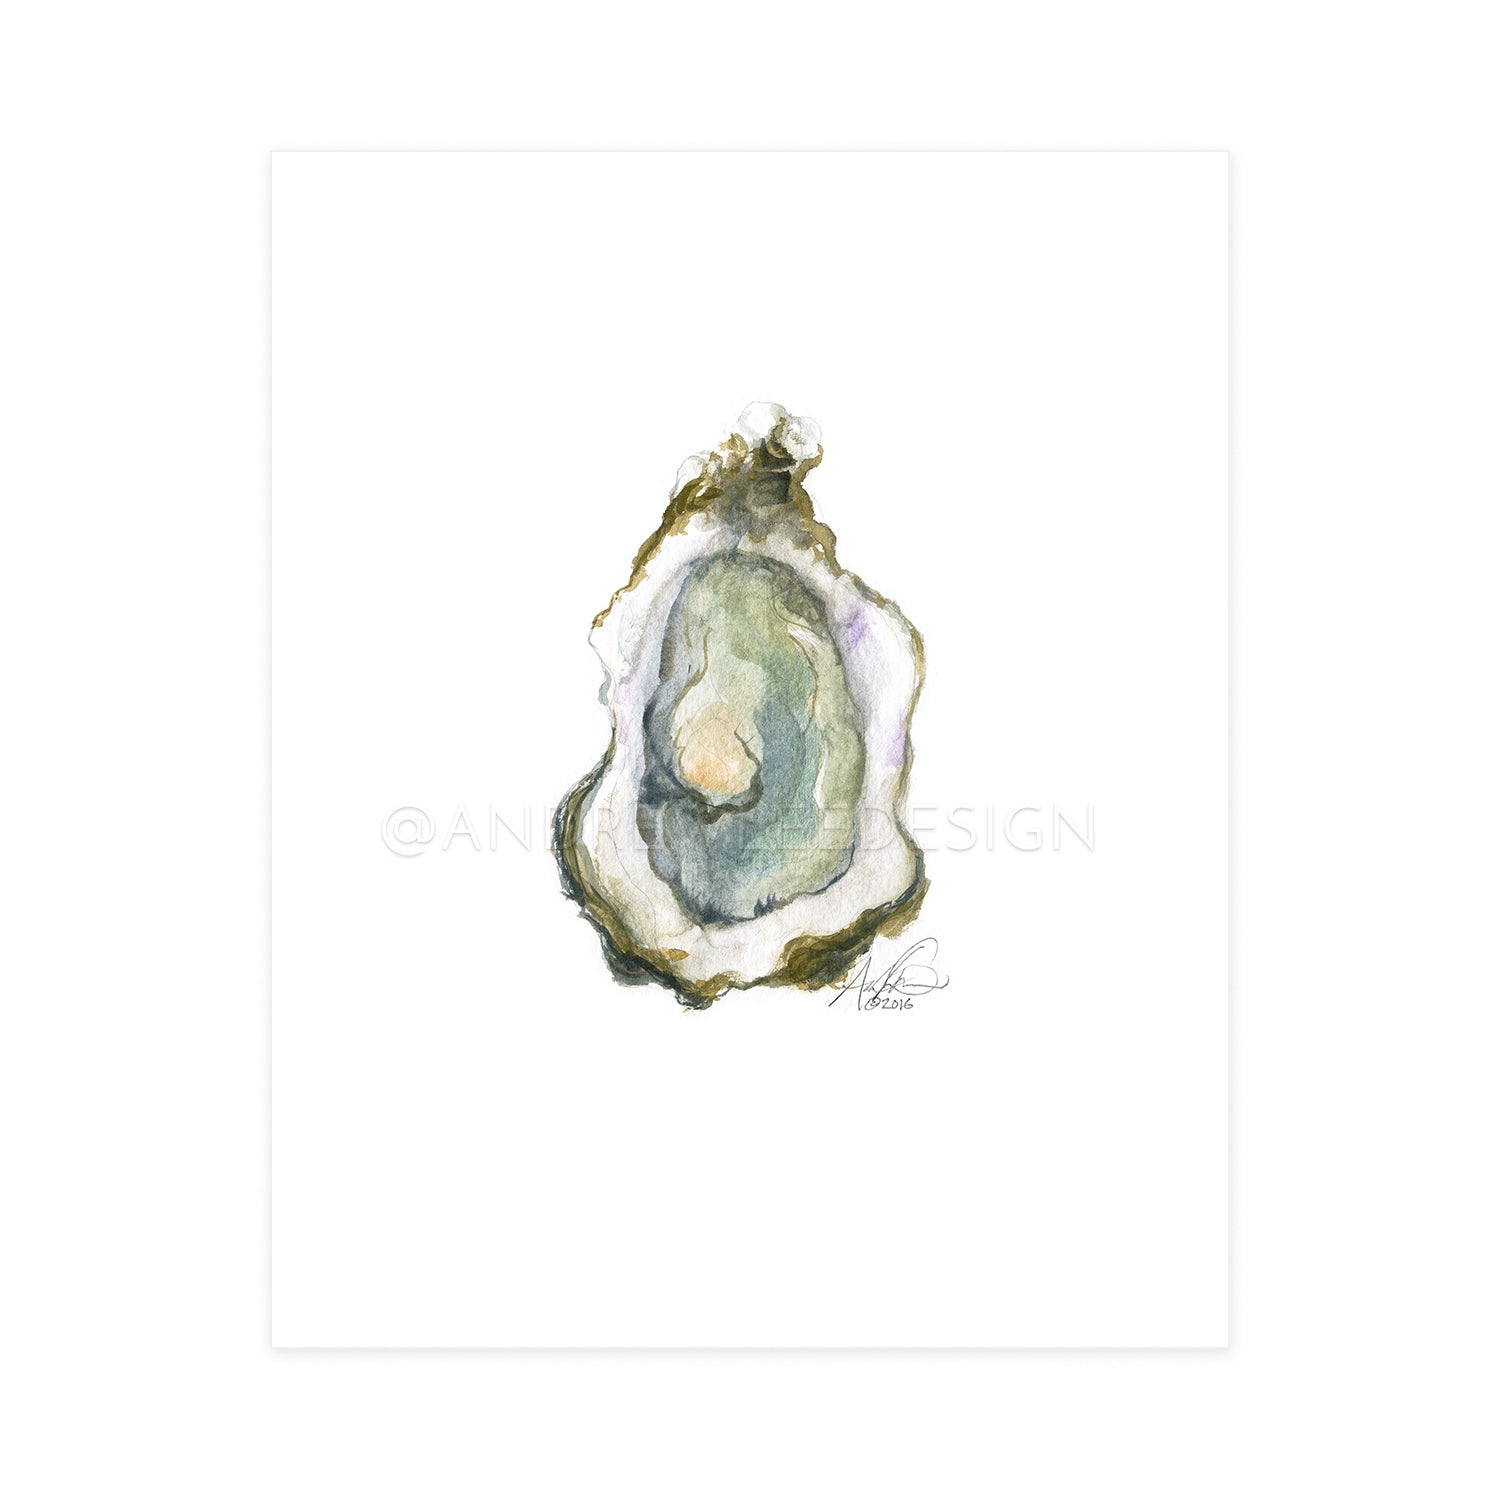 Oyster, Print #007